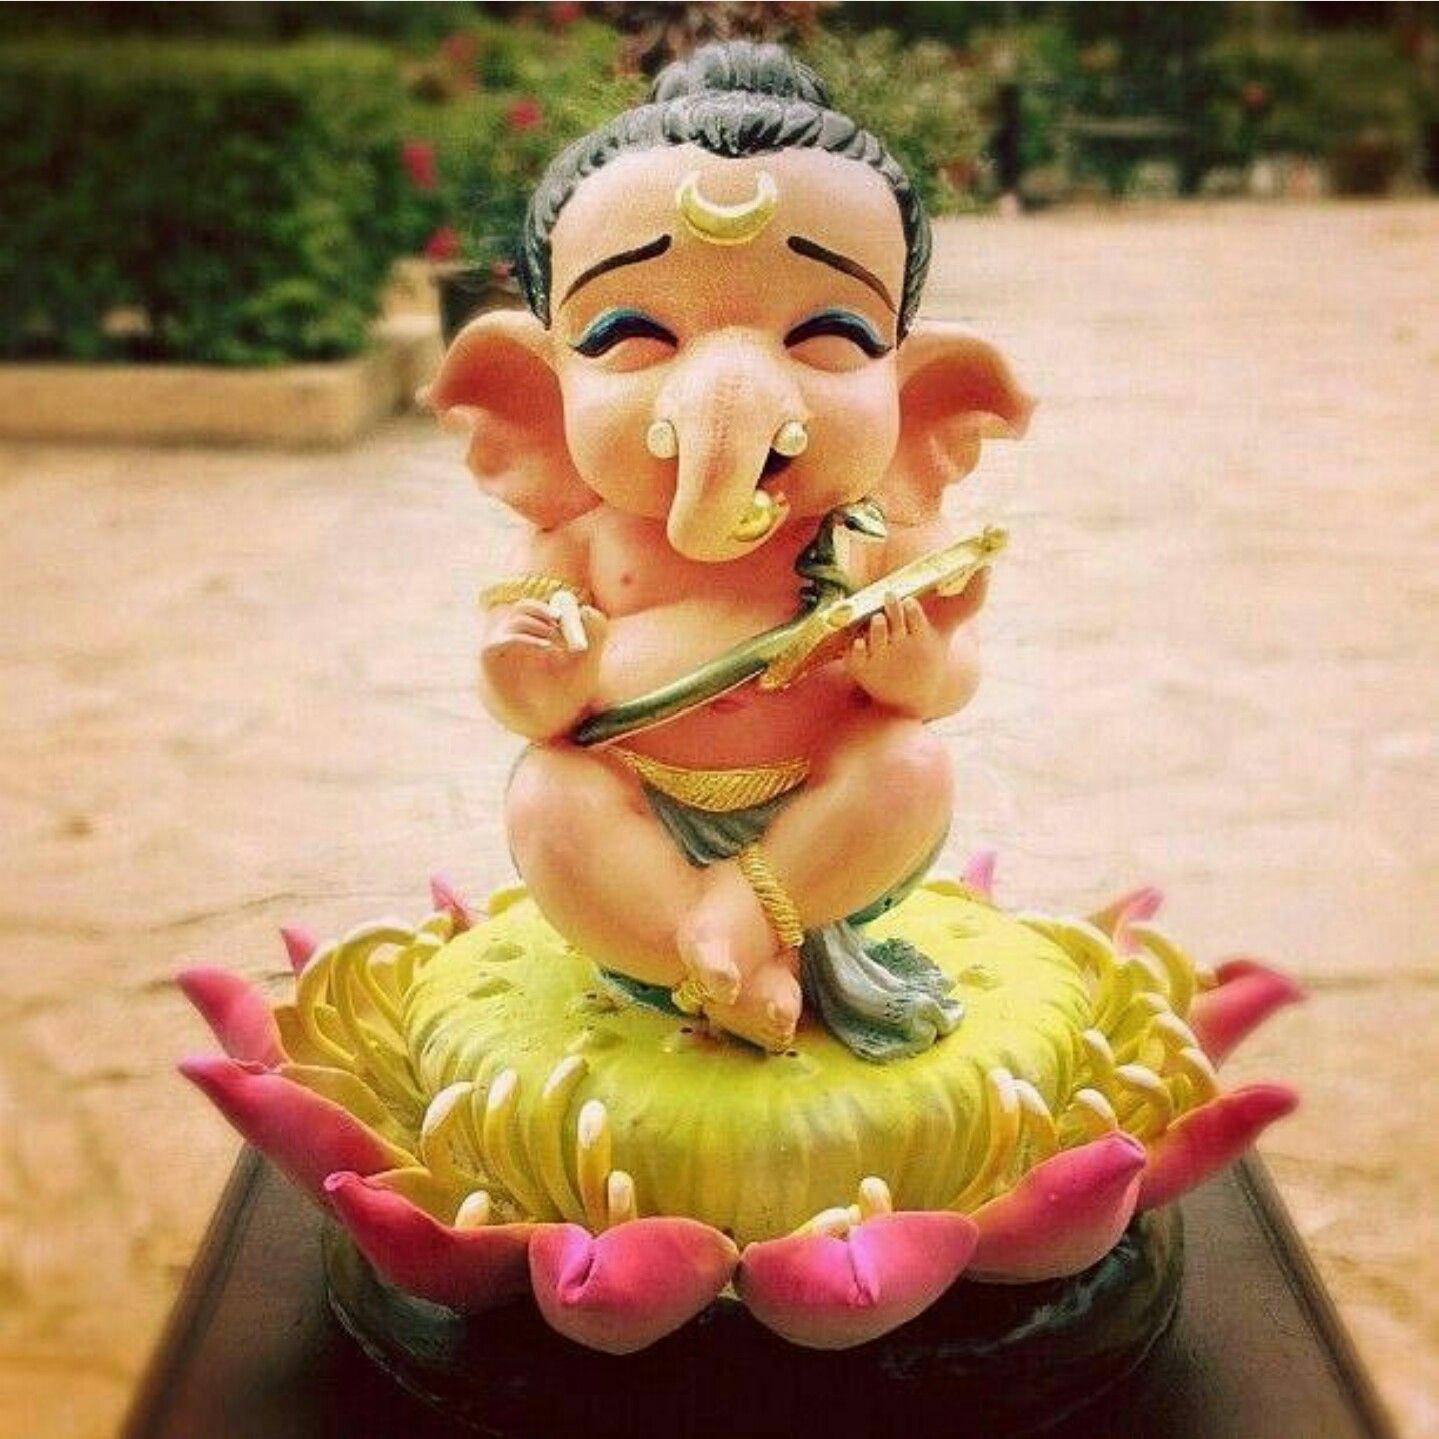 A Fascinating Image Depicts A Baby Statue Of Bal Ganesh Smiling While Sitting On A Lotus Flower Stamen.